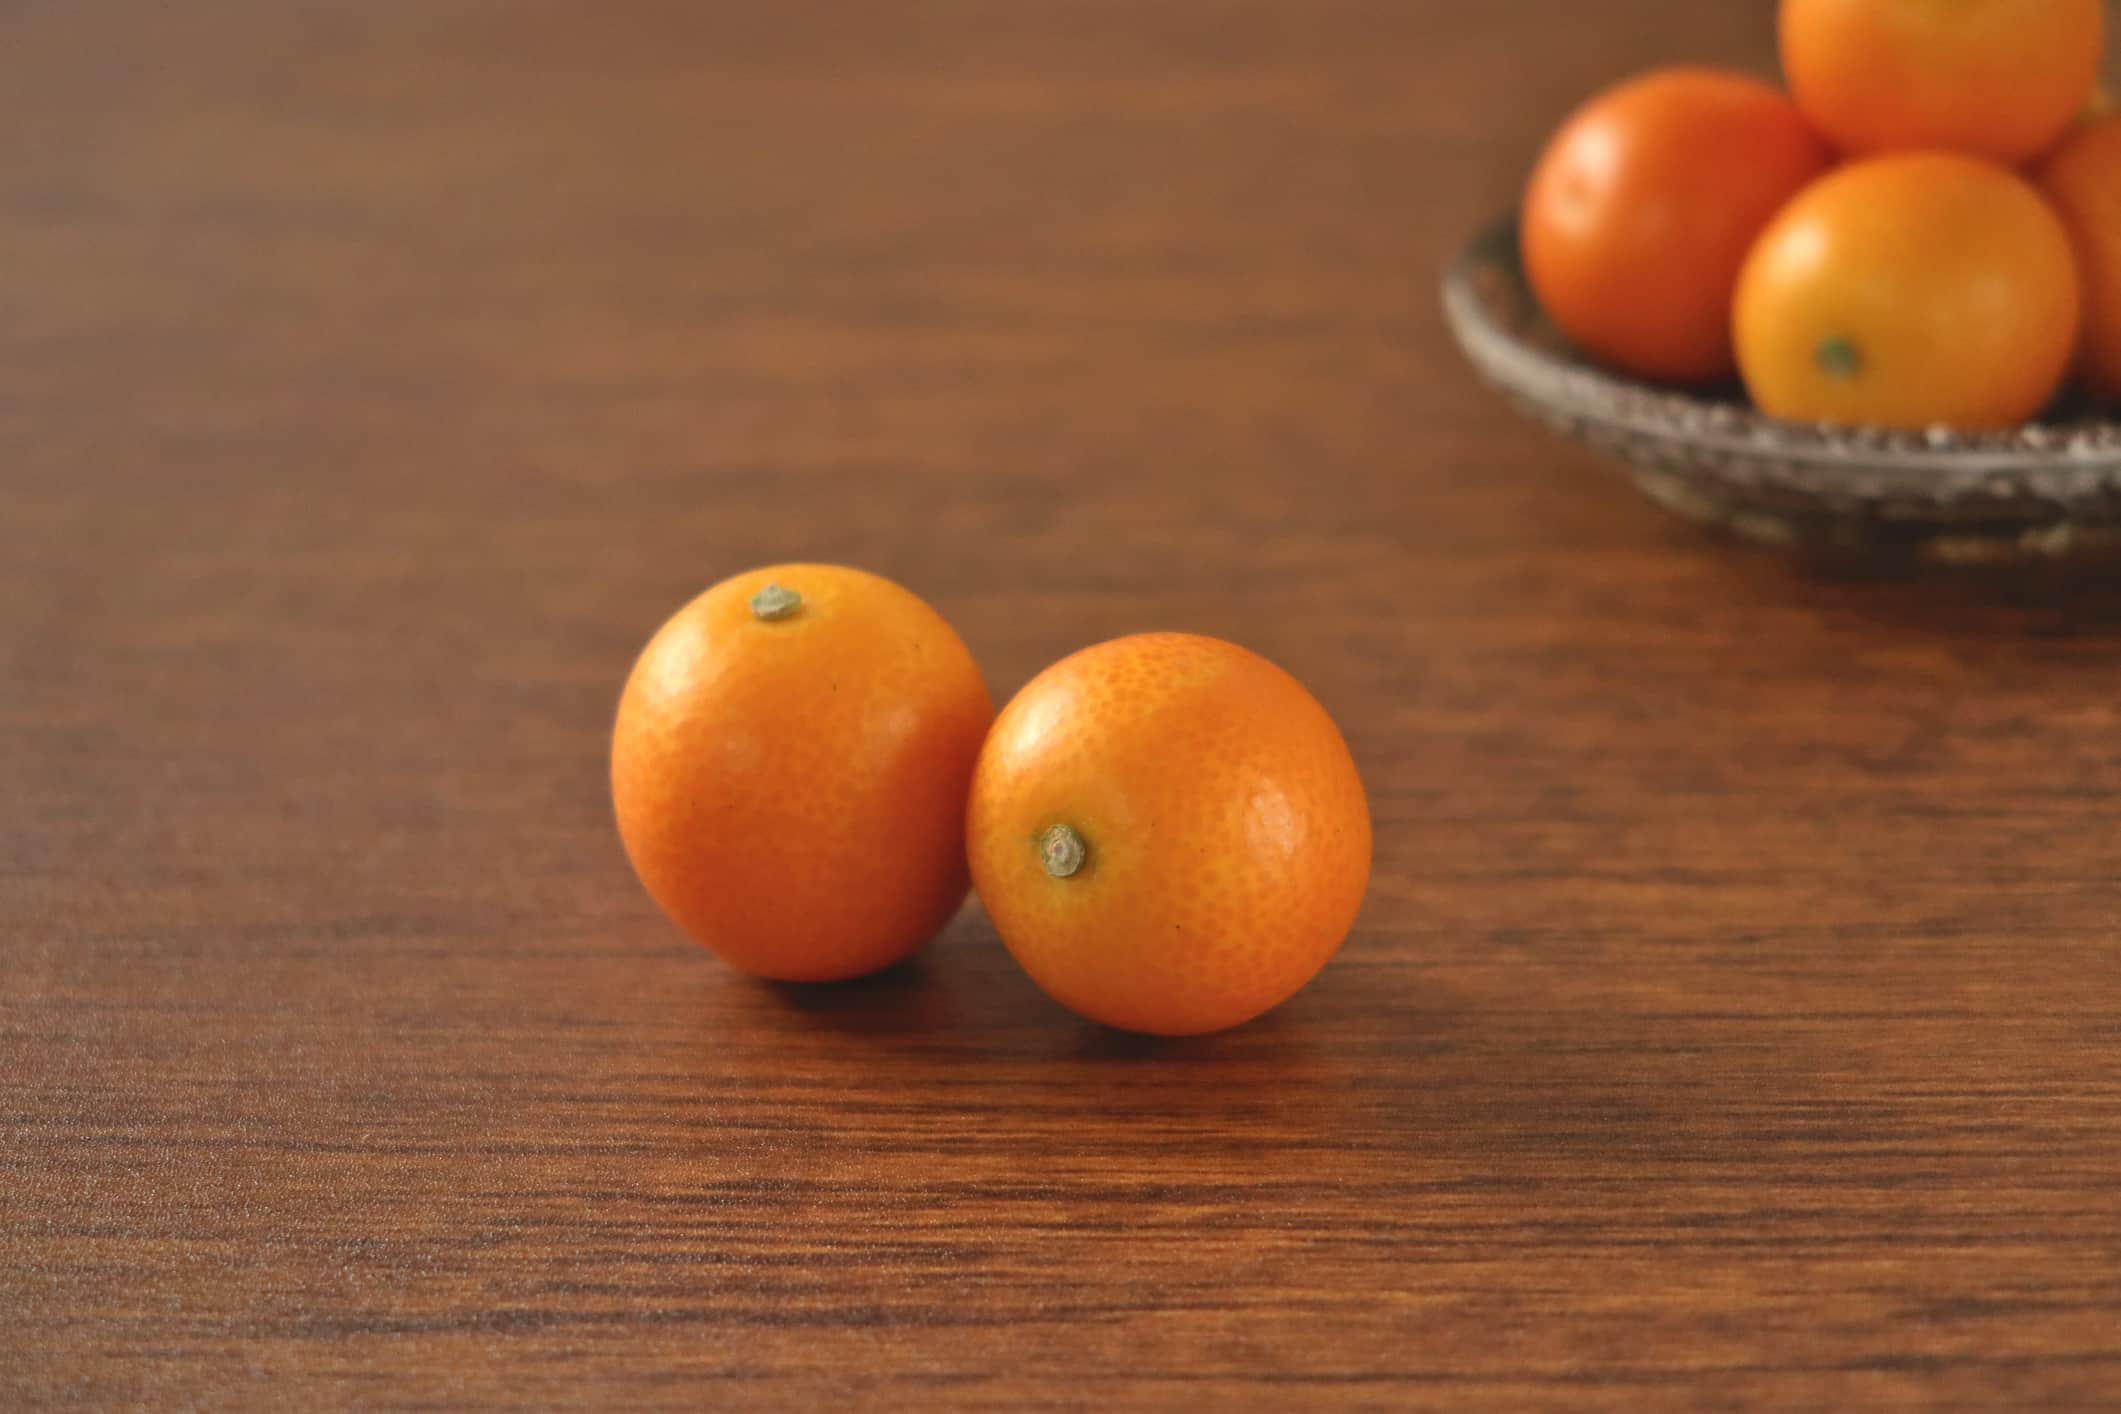 There are kumquats on the table and on the plate.